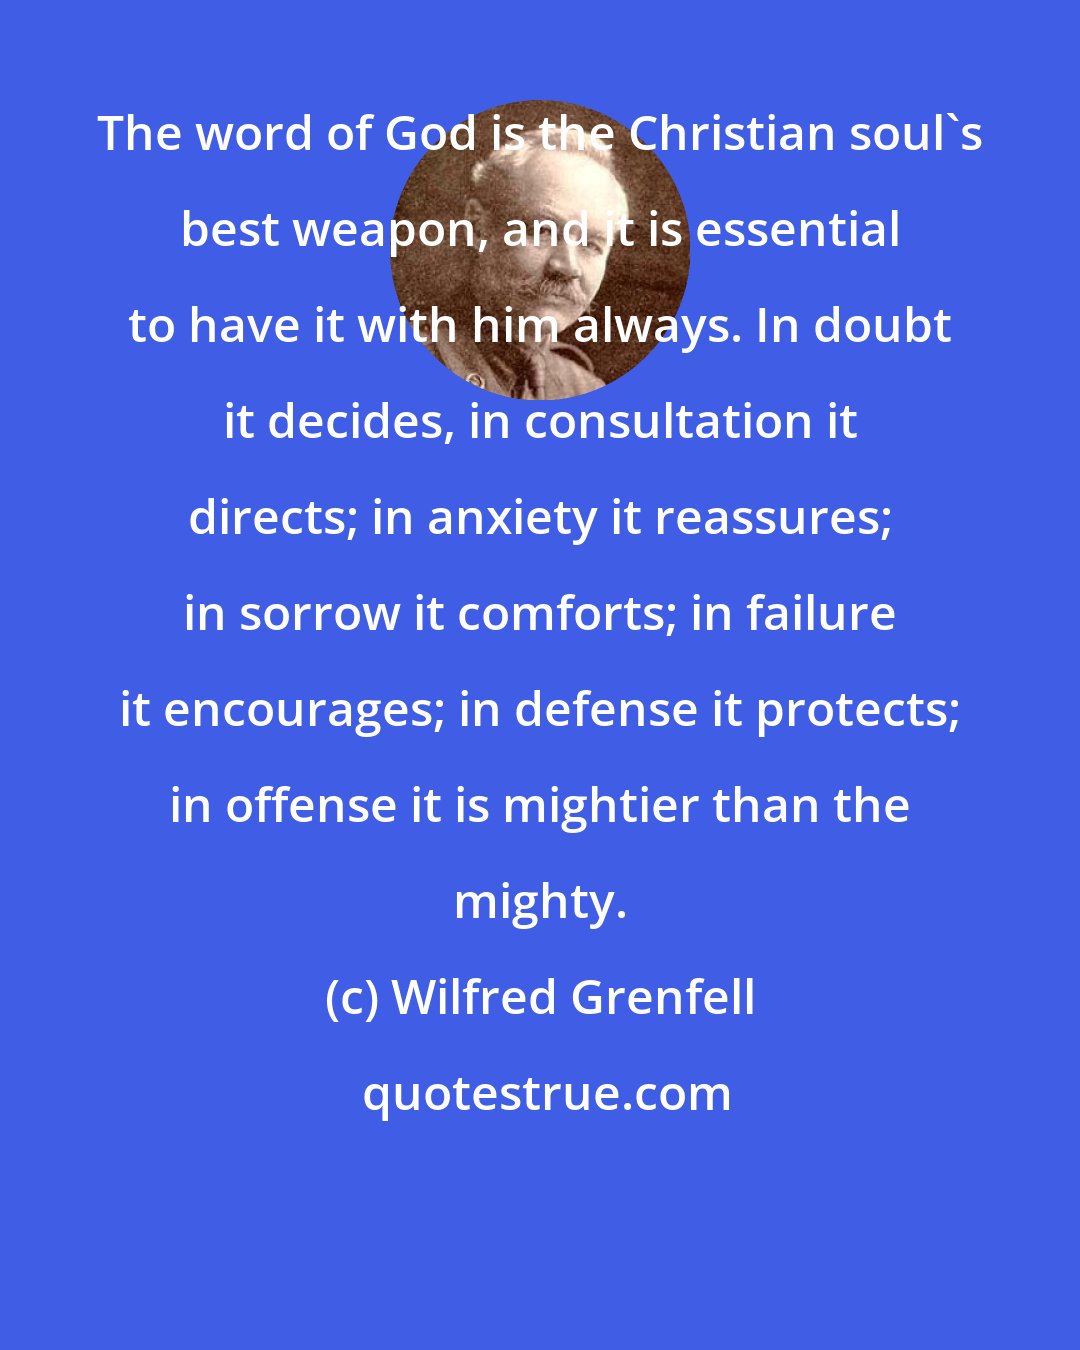 Wilfred Grenfell: The word of God is the Christian soul's best weapon, and it is essential to have it with him always. In doubt it decides, in consultation it directs; in anxiety it reassures; in sorrow it comforts; in failure it encourages; in defense it protects; in offense it is mightier than the mighty.